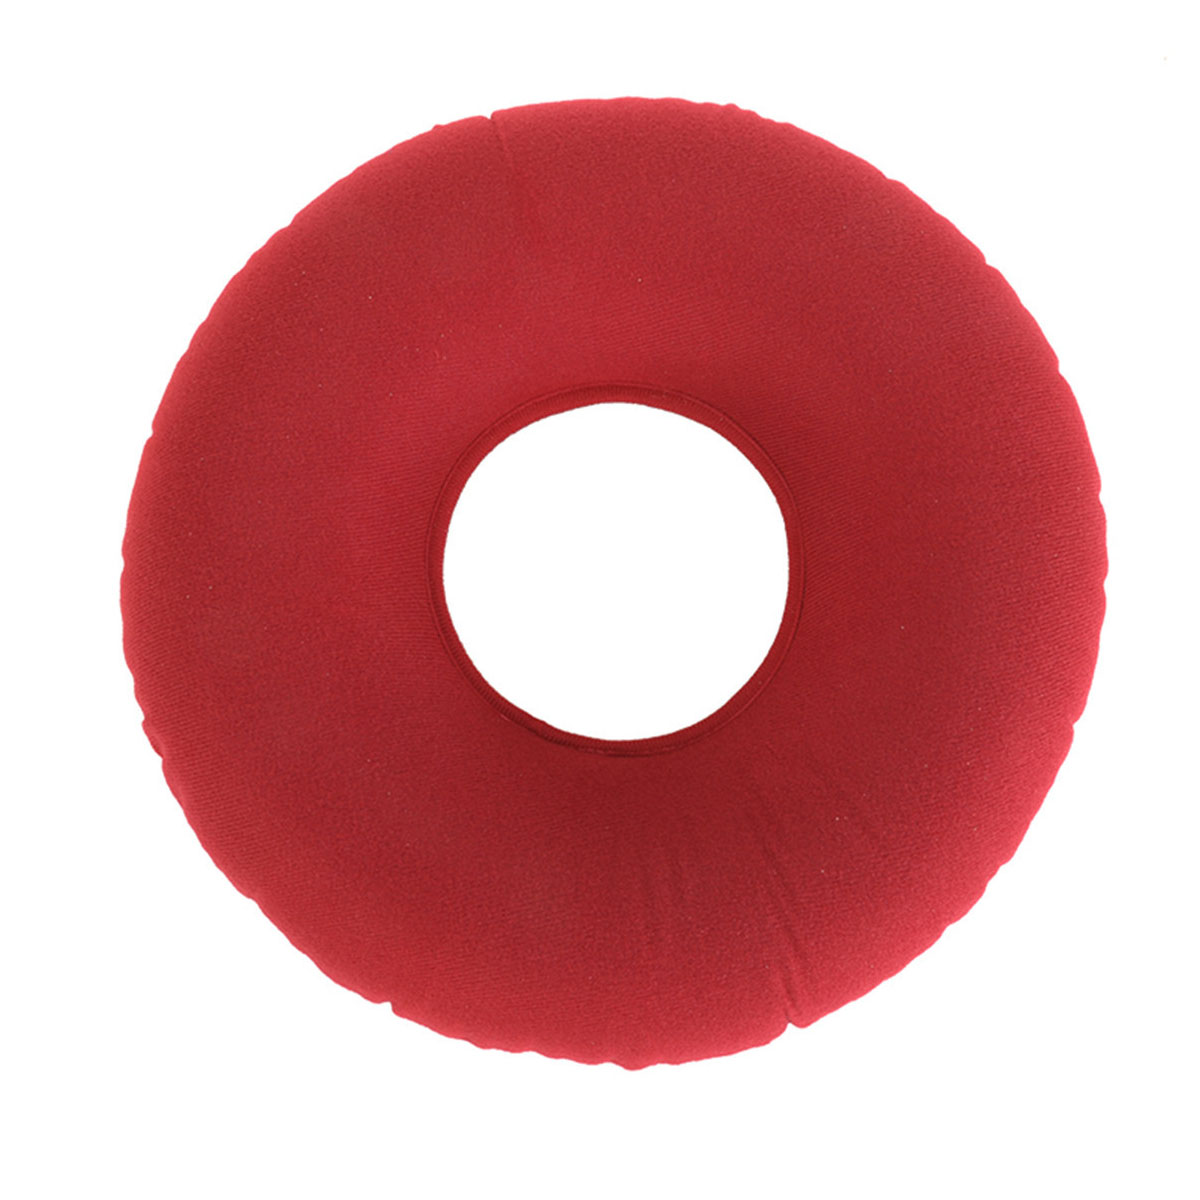 36x13CM-Round-Inflatable-Cushion-Seat-Pad-Massage-Cushion-Mat-Hemorrhoid-Pillow-With-Pump-for-Office-1811922-8